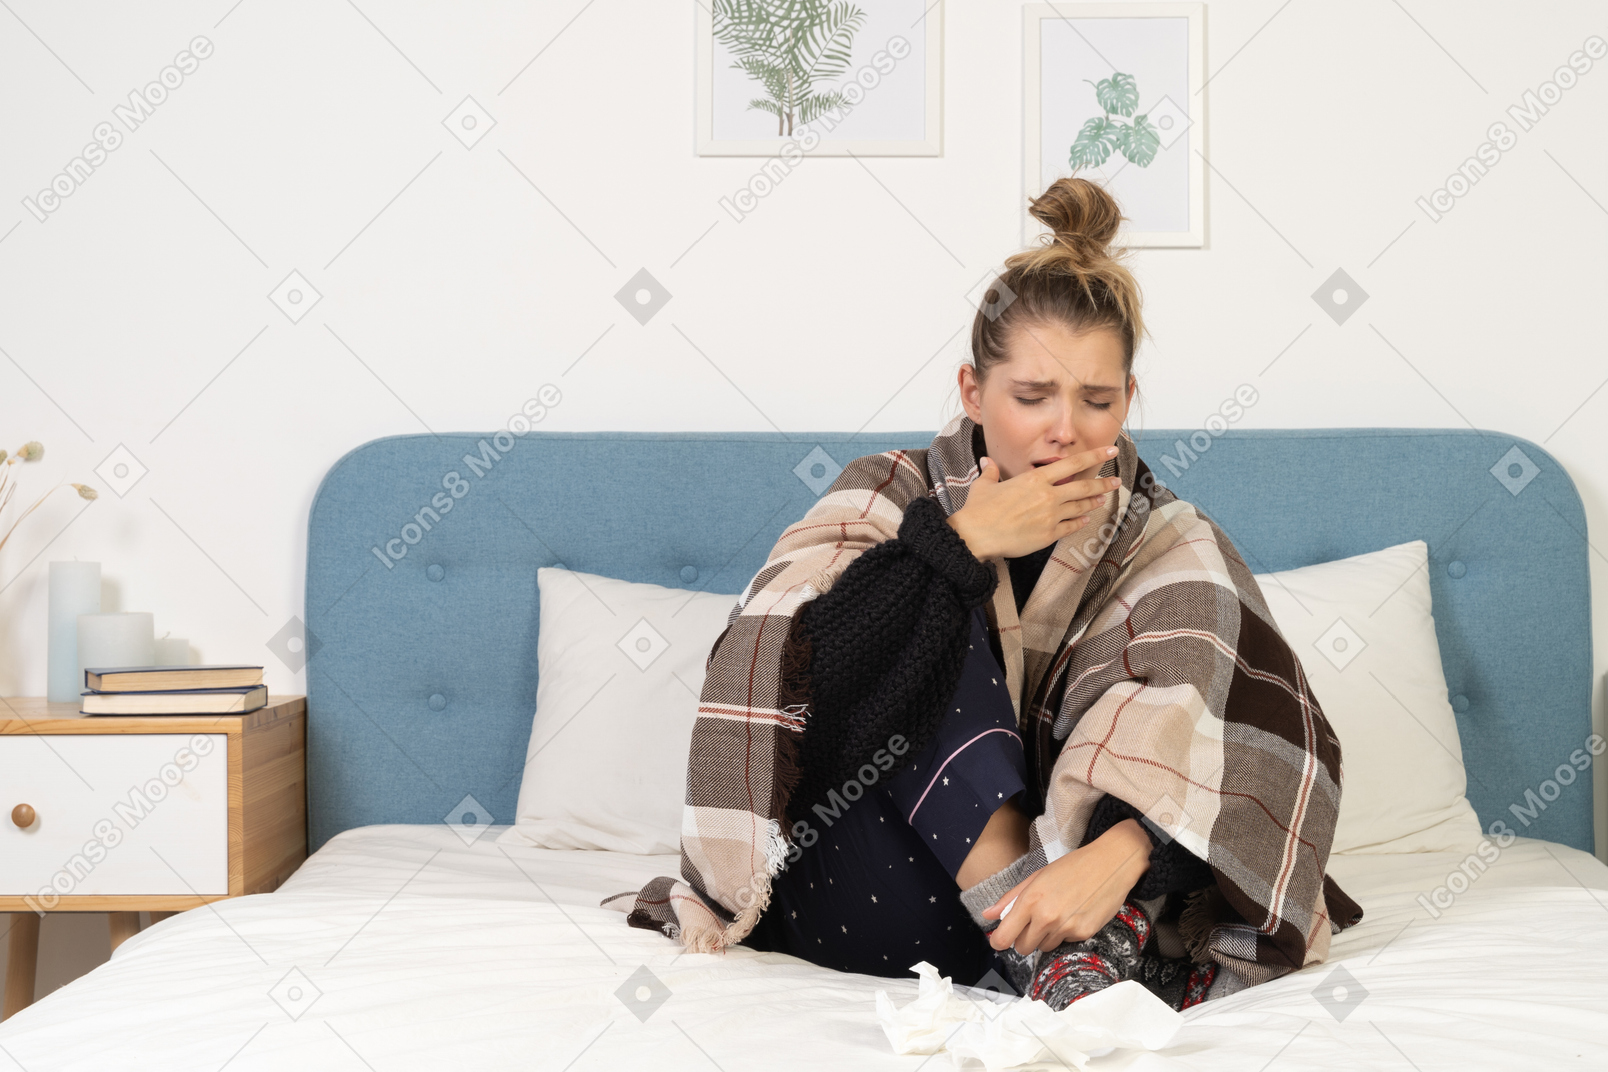 Front view of an ill coughing young lady in pajamas wrapped in checked blanket in bed